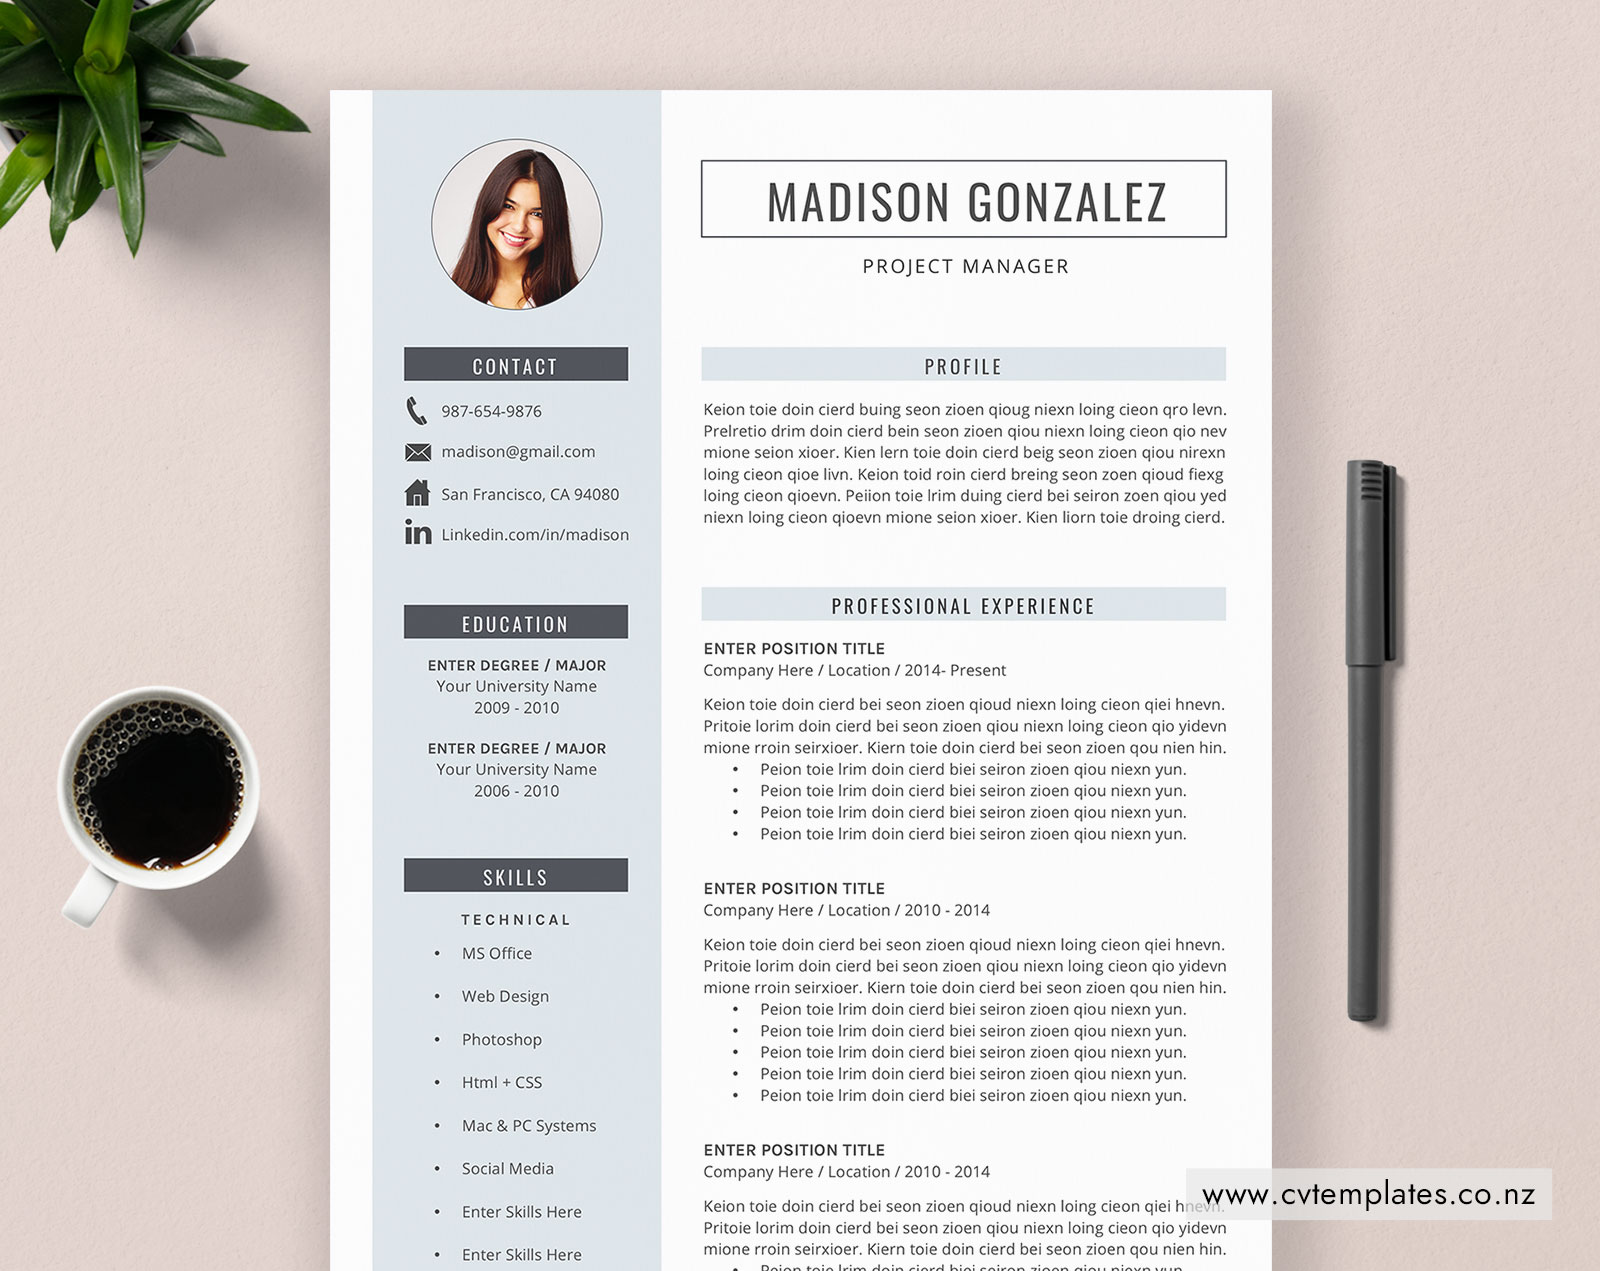 Word 2010 Resume Template Download from www.cvtemplates.co.nz